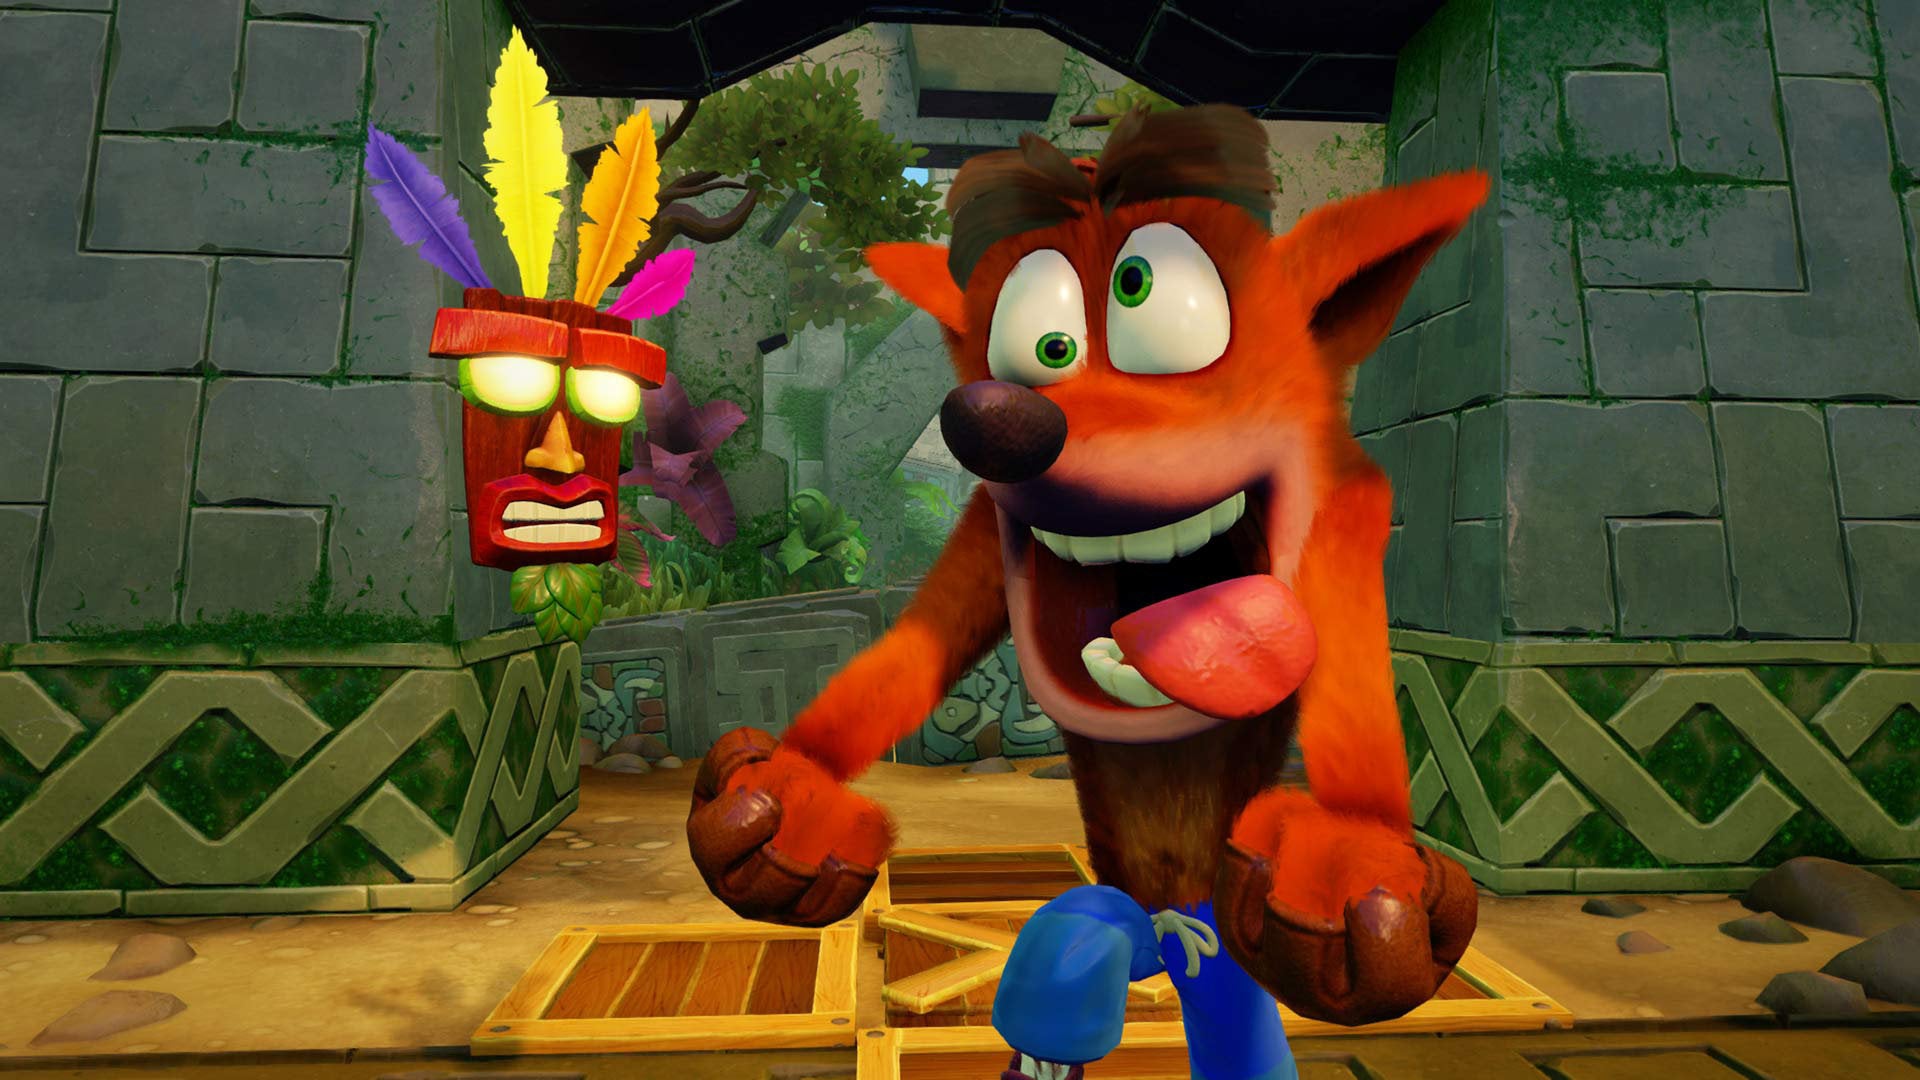 Image for More people in the UK bought Crash Bandicoot in its first week than Horizon Zero Dawn